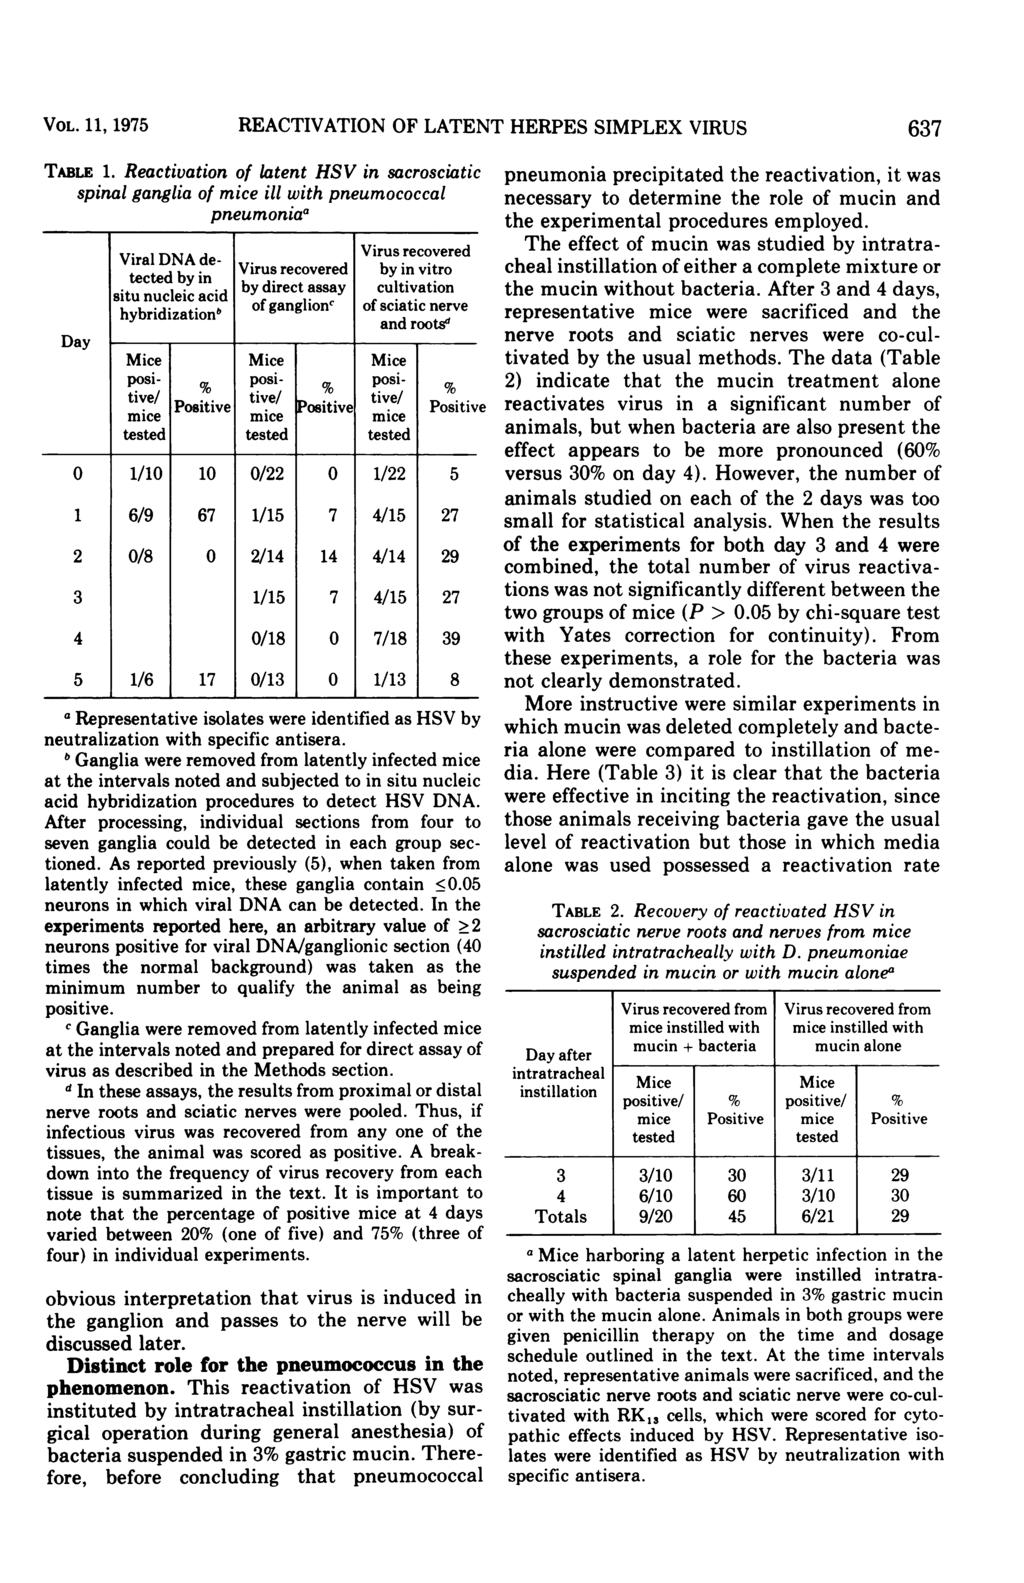 VOL. 11, 1975 REACTIVATION OF LATENT HERPES SIMPLEX VIRUS 637 TABLE 1.